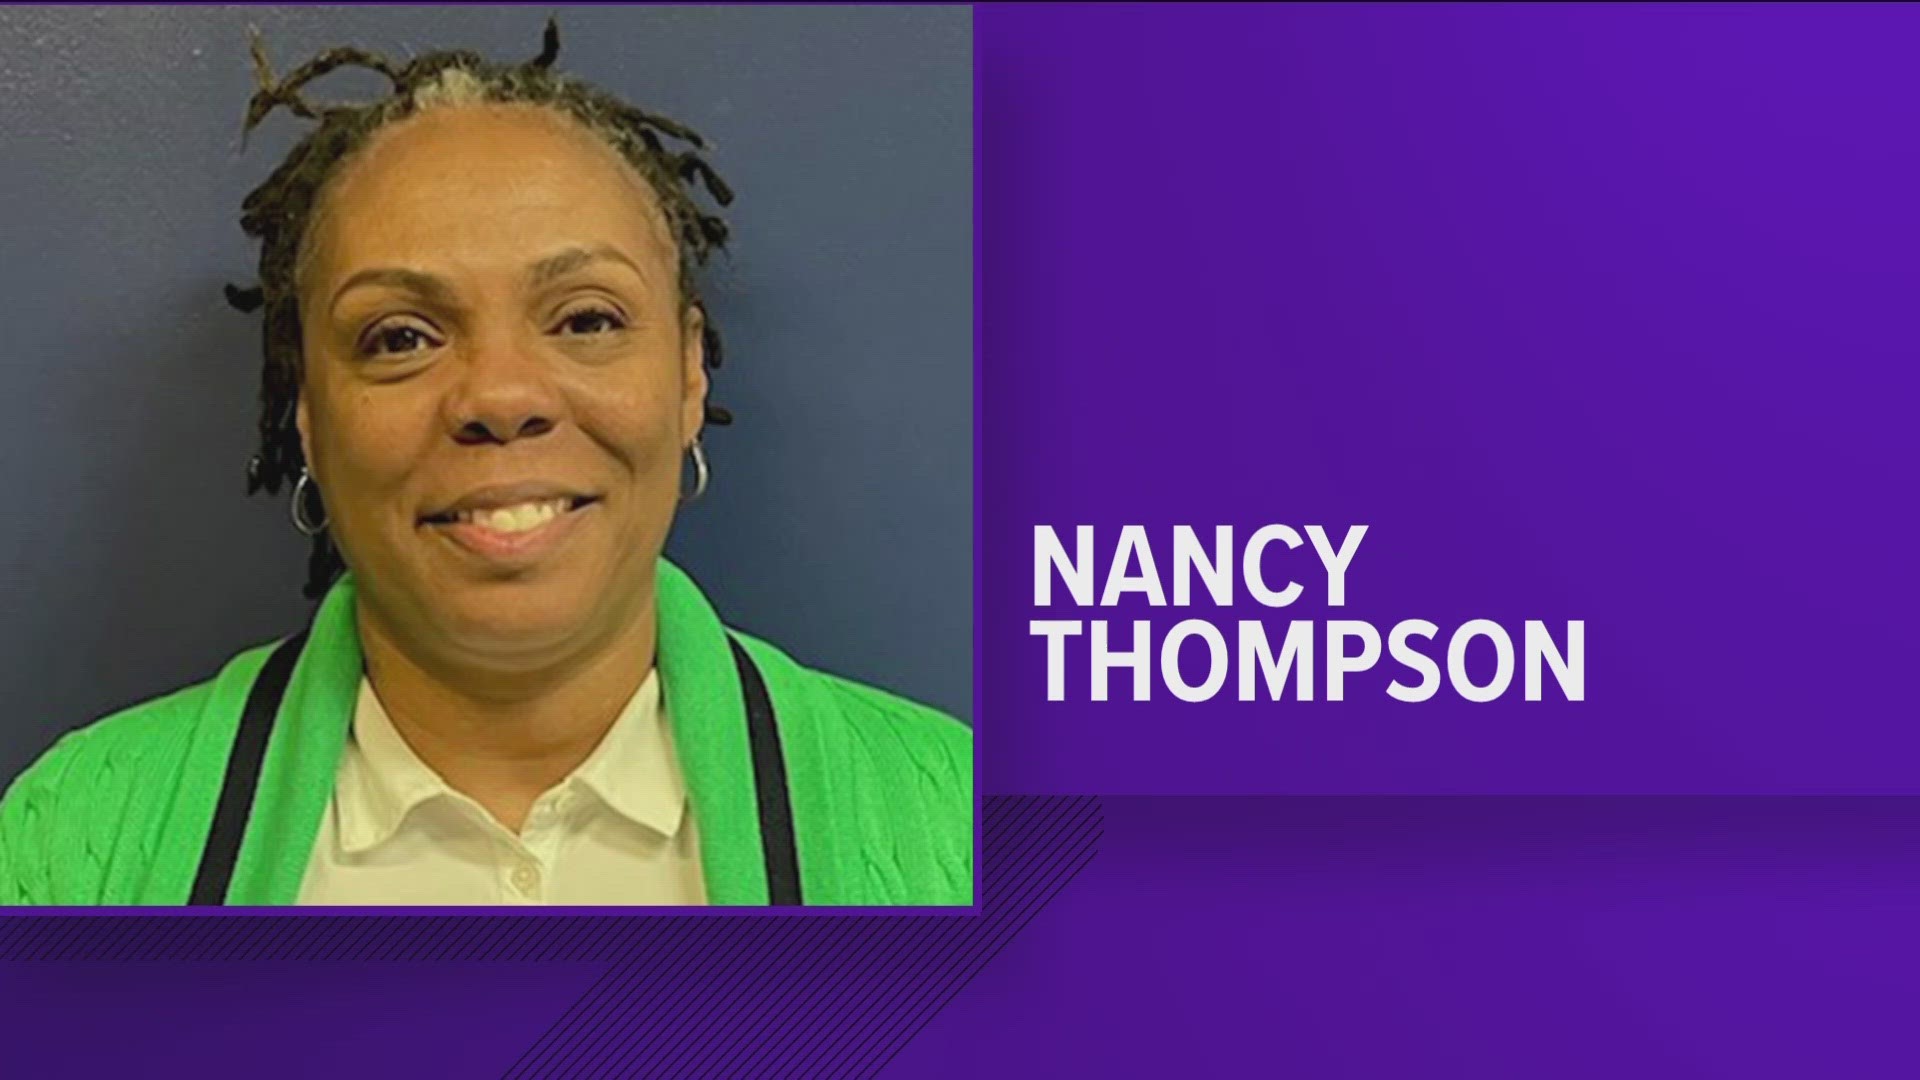 Nancy Thompson will replace Diana Ruiz-Krause as the Chief Security Officer at Toledo Public Schools, who has served in the role since 2018.